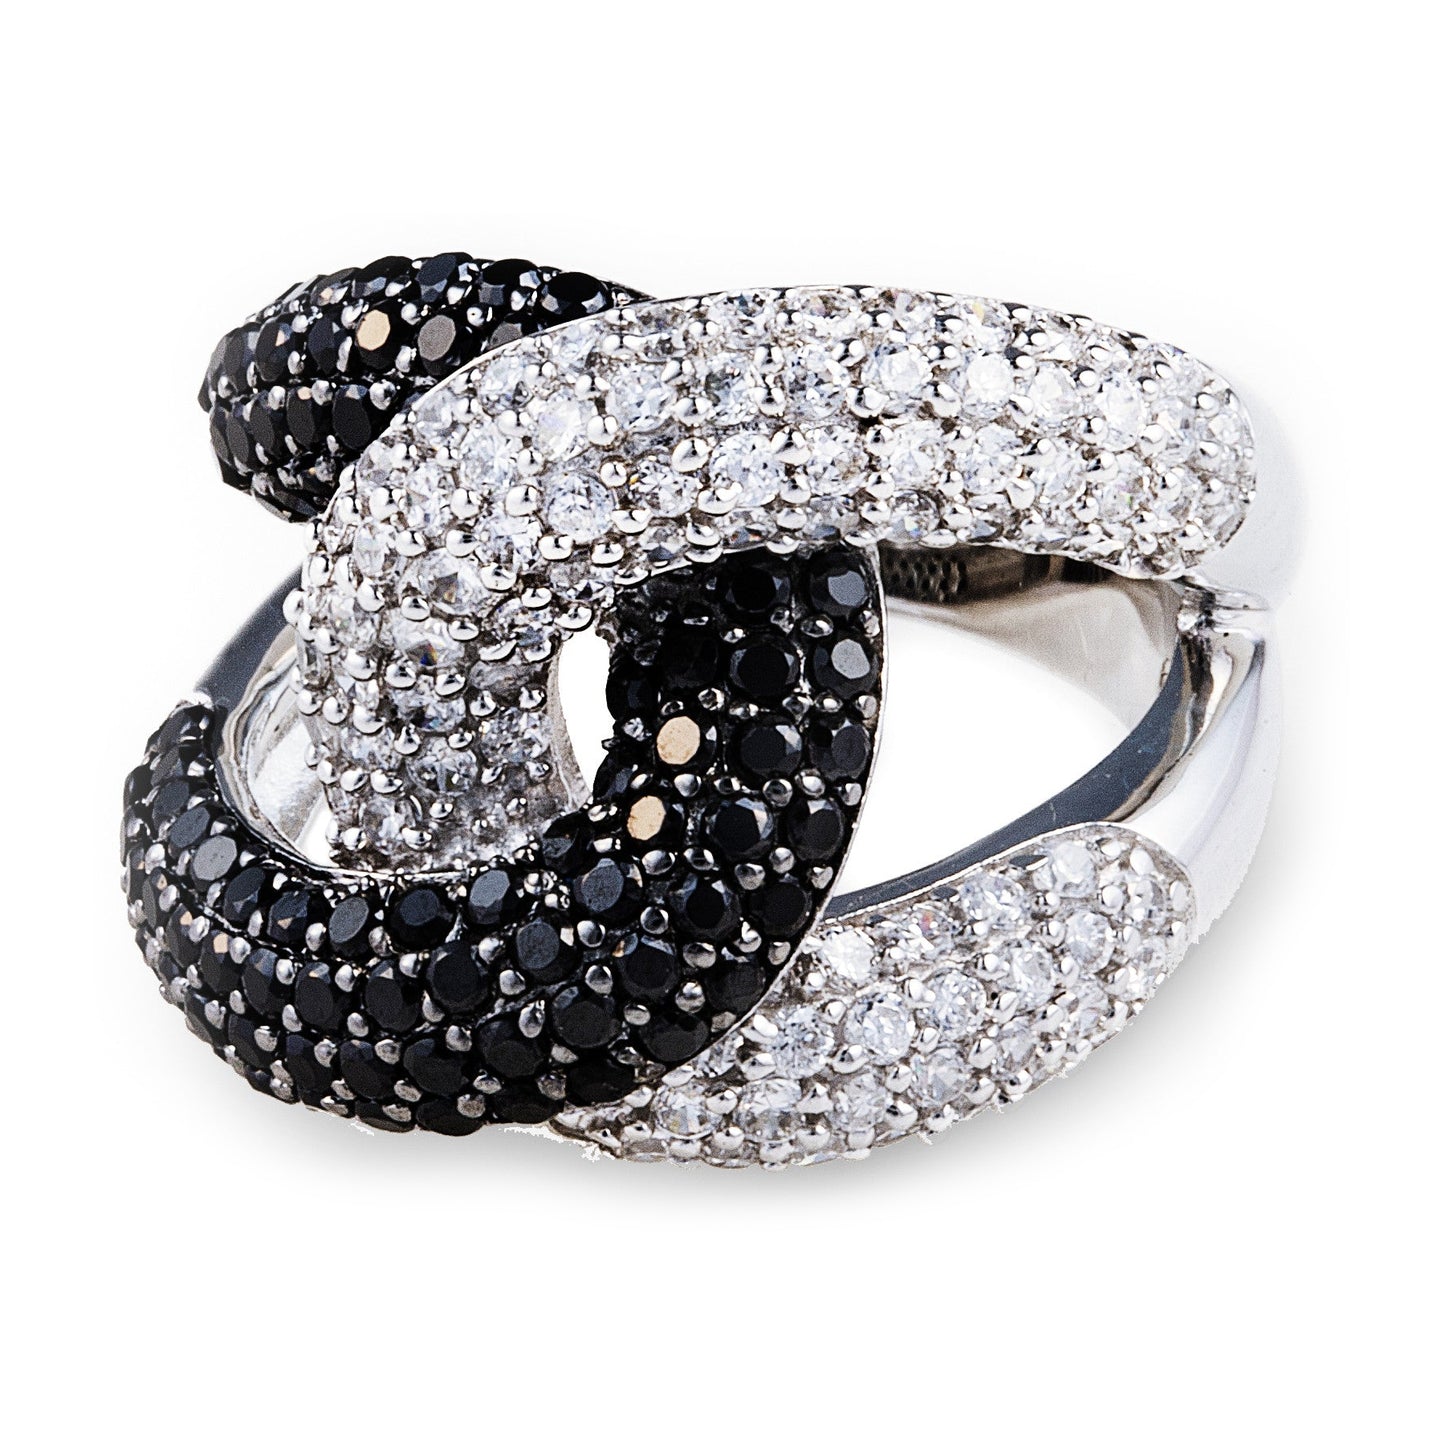 White Night Coco Ring in 925 sterling silver with black cubic zirconia stones entwined with clear/white cubic zirconia stones. Affordable luxury jewellery by Bellagio & Co. Worldwide shipping